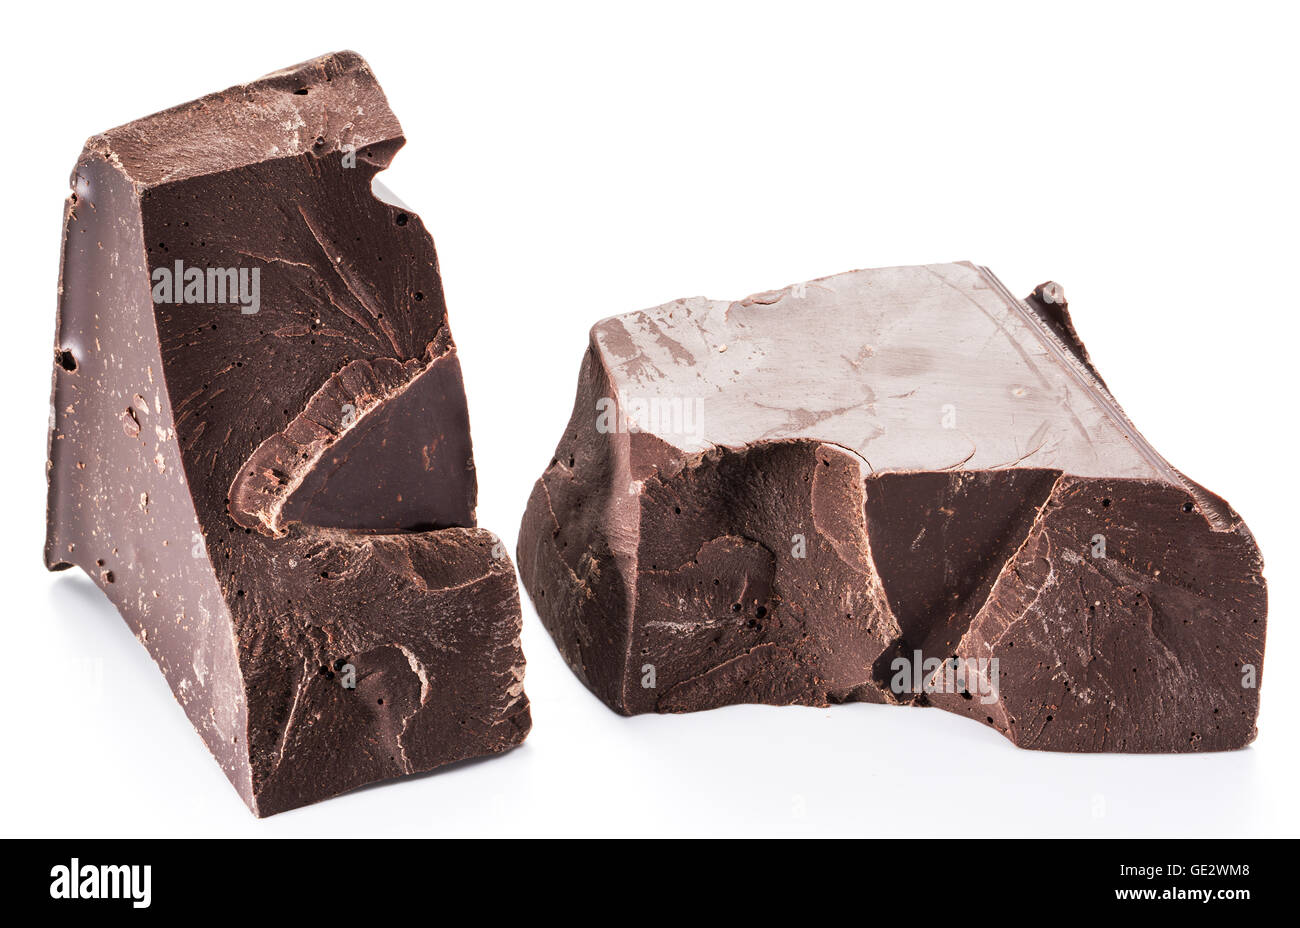 Chocolate block isolated on a white background. Stock Photo